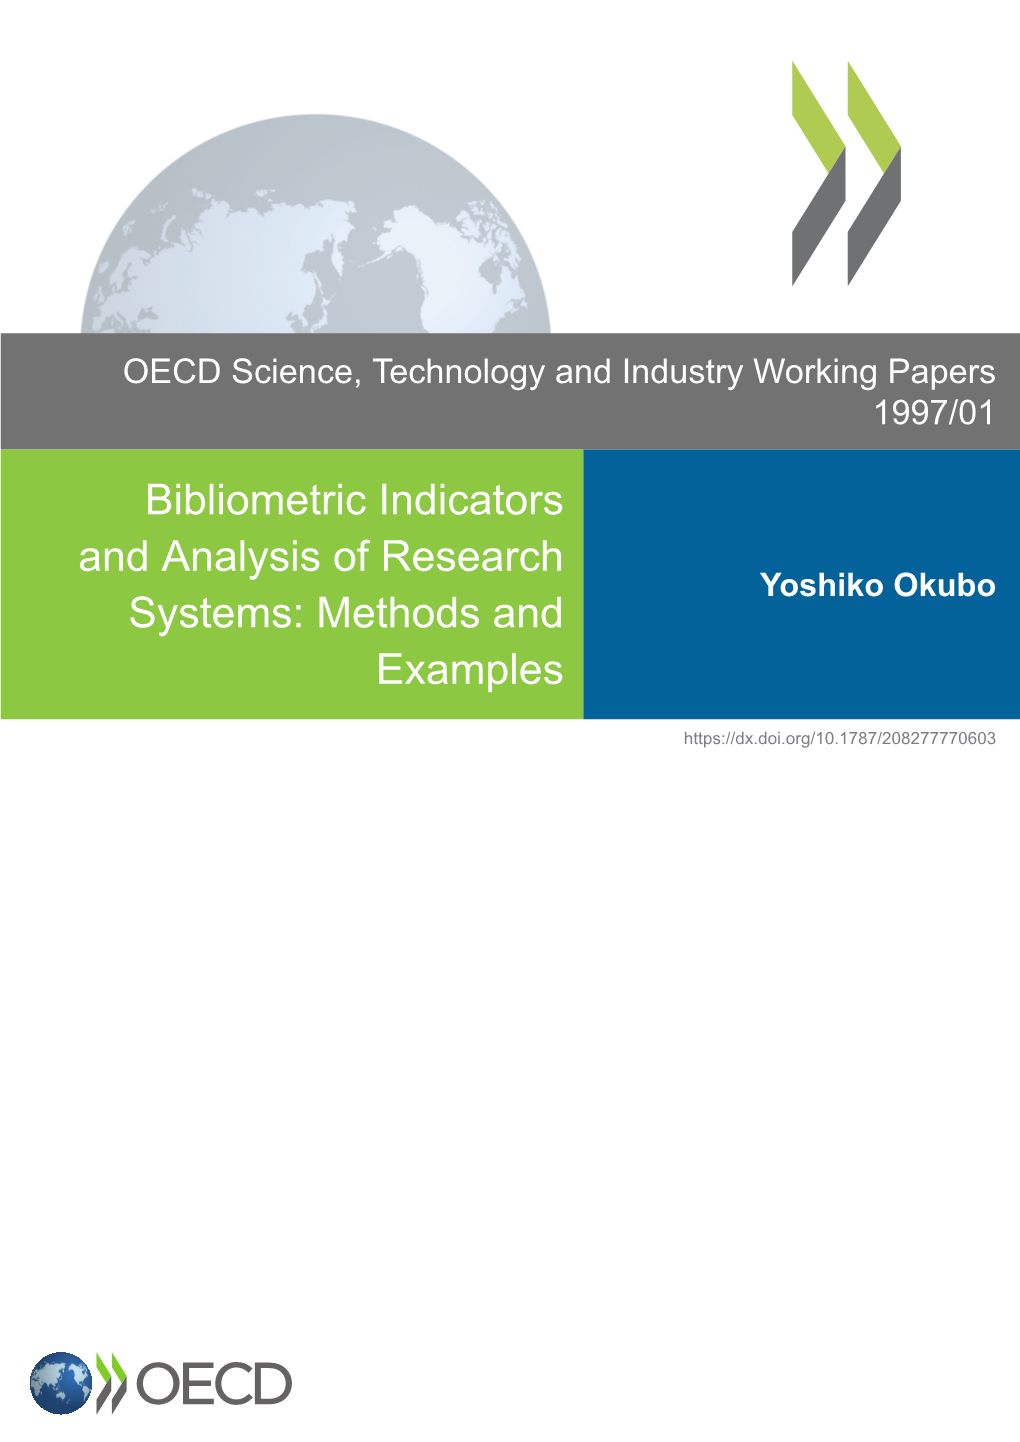 Bibliometric Indicators and Analysis of Research Systems: Methods and Examples